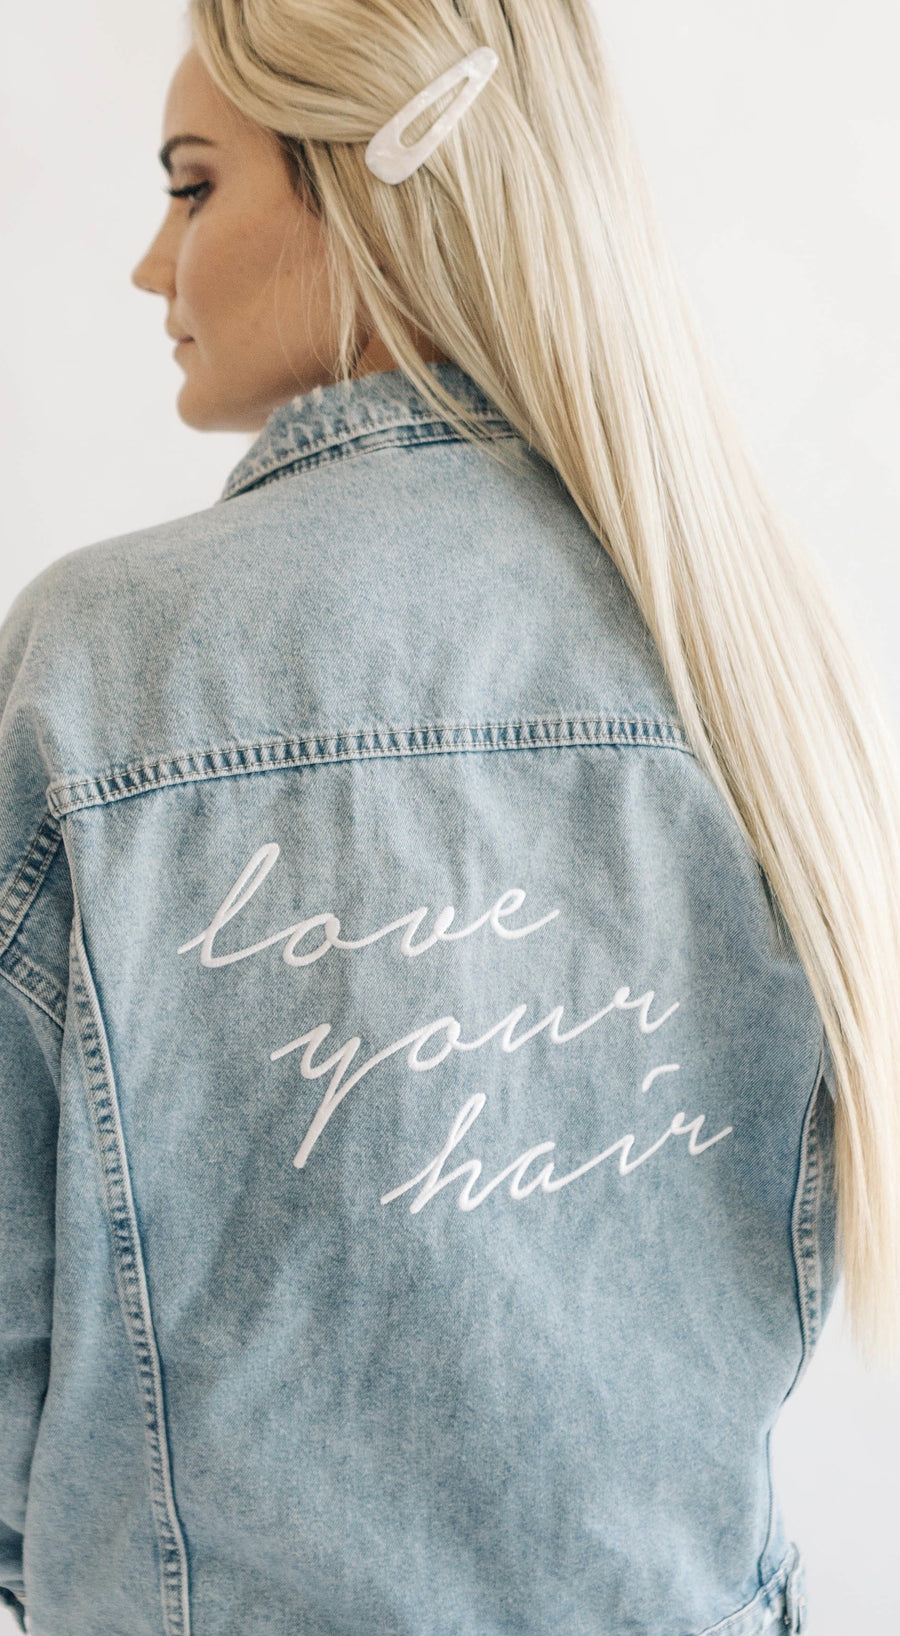 Just In: Laced Hair Jean Jackets!